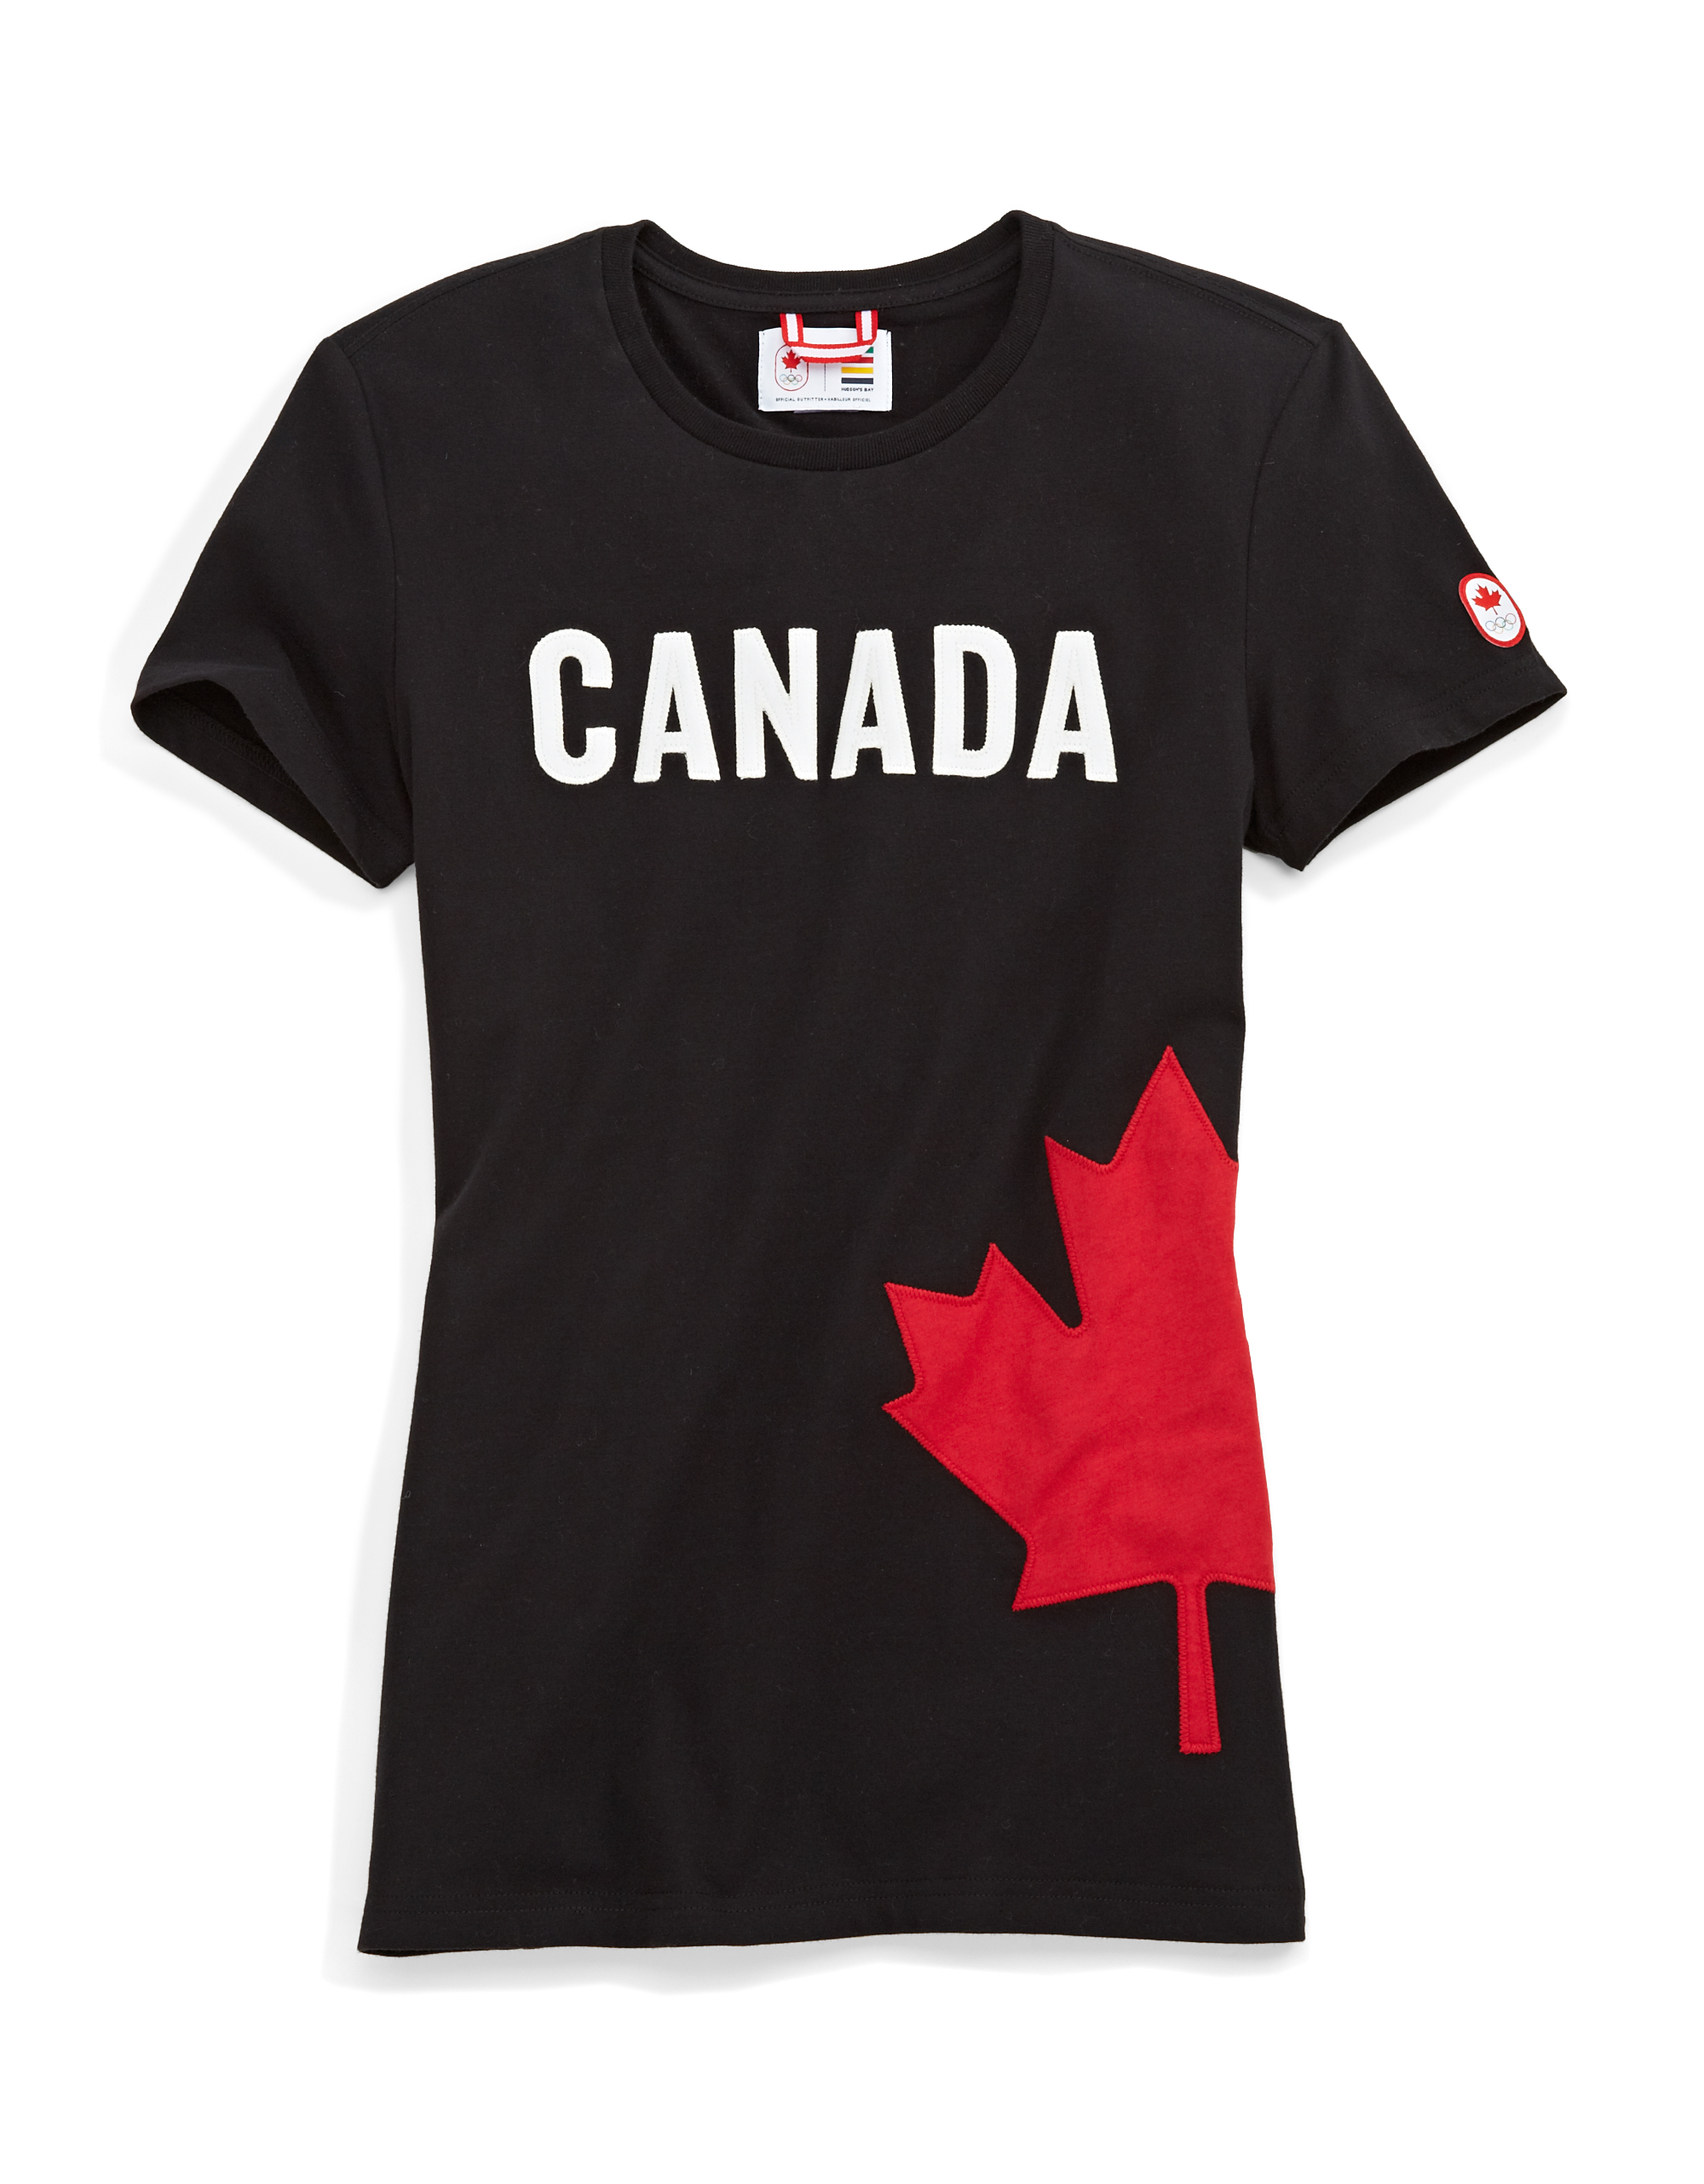 Wear Your Pride on Your Sleeve: Sochi 2014 Canadian Olympic Team ...